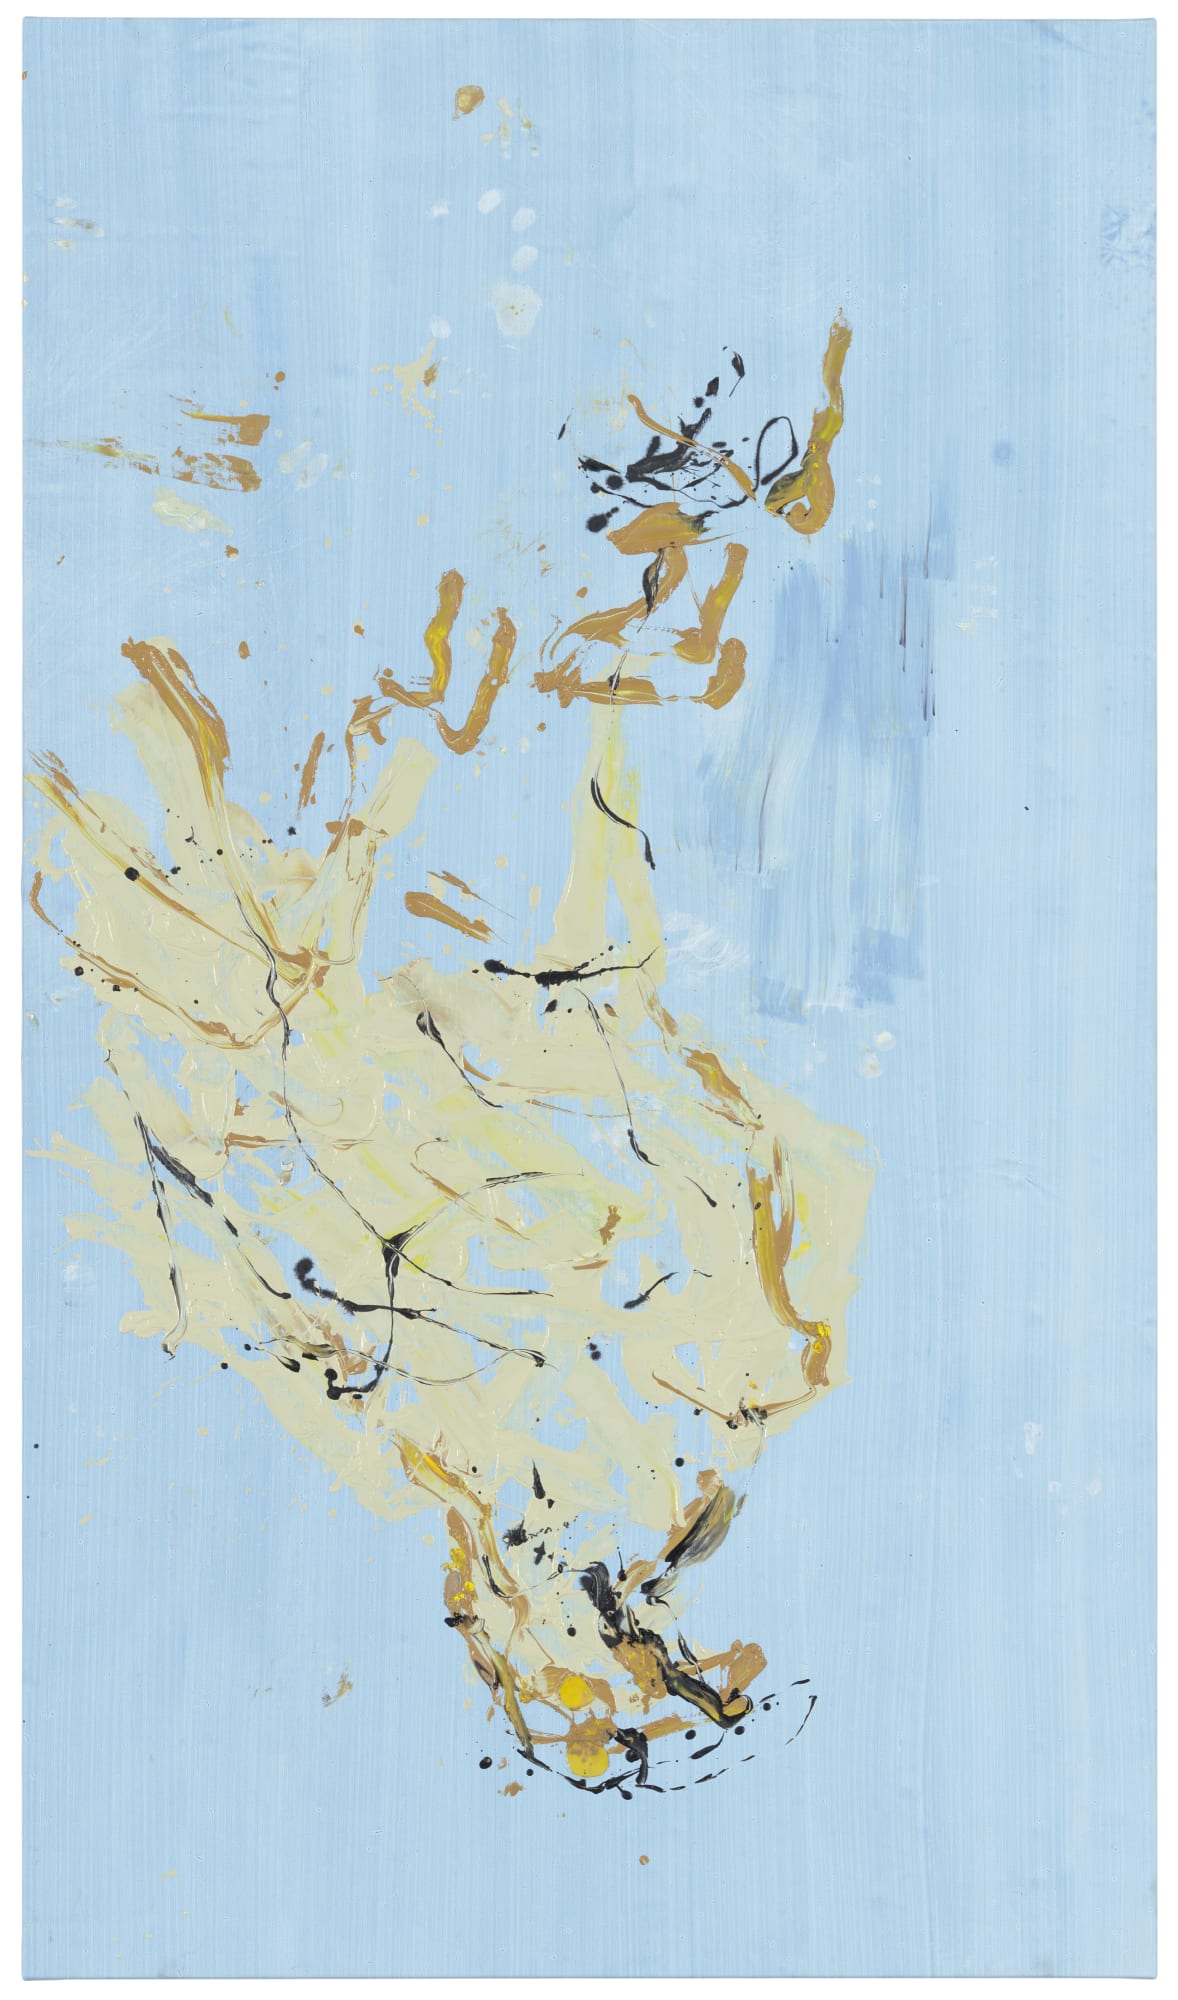 The final countdown of Georg Baselitz Strength is dwindling, genius makes up for it